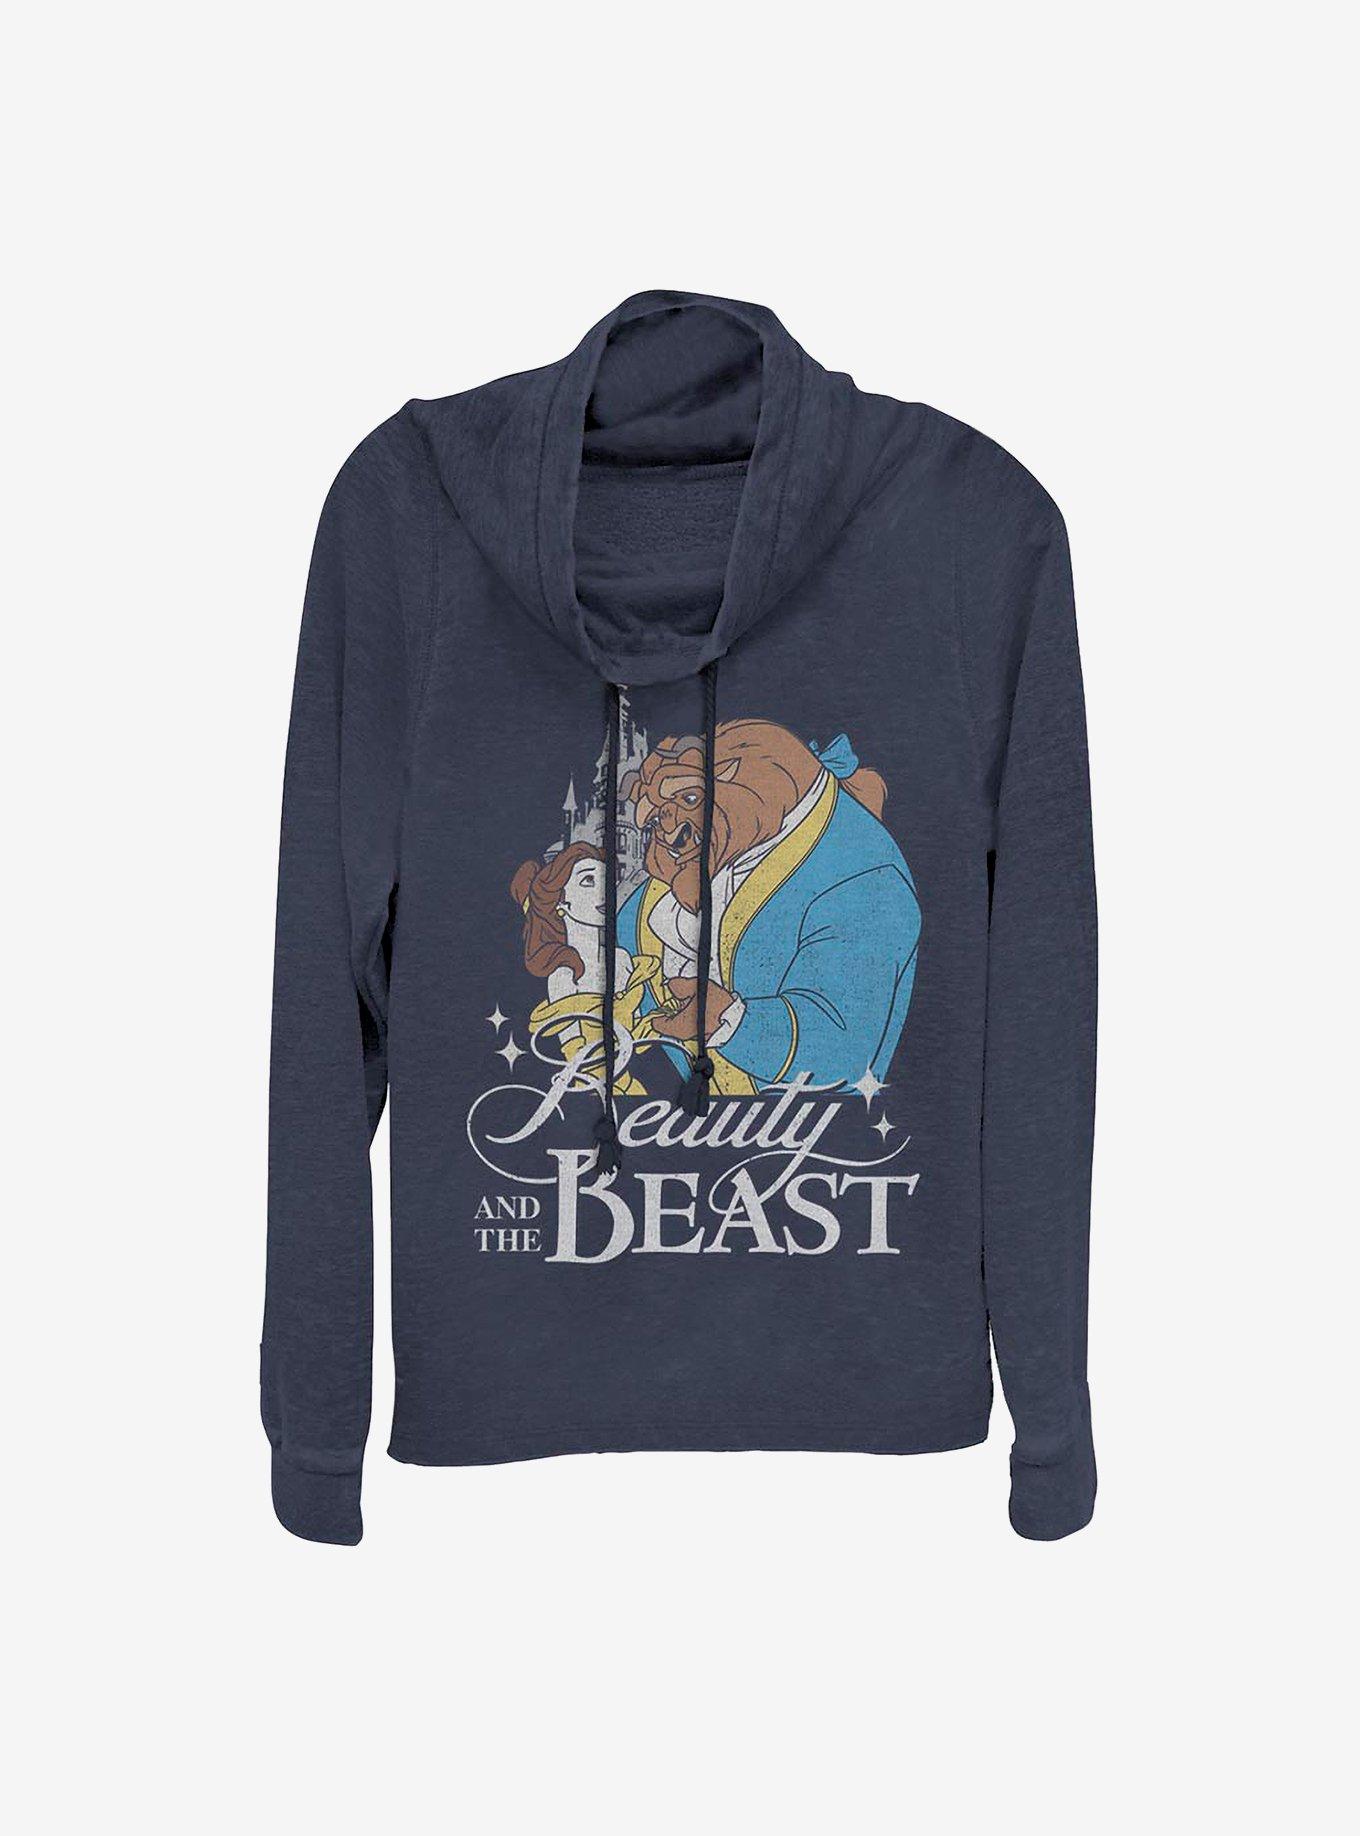 Disney Beauty And The Beast Classic Cowlneck Long-Sleeve Girls Top, NAVY, hi-res